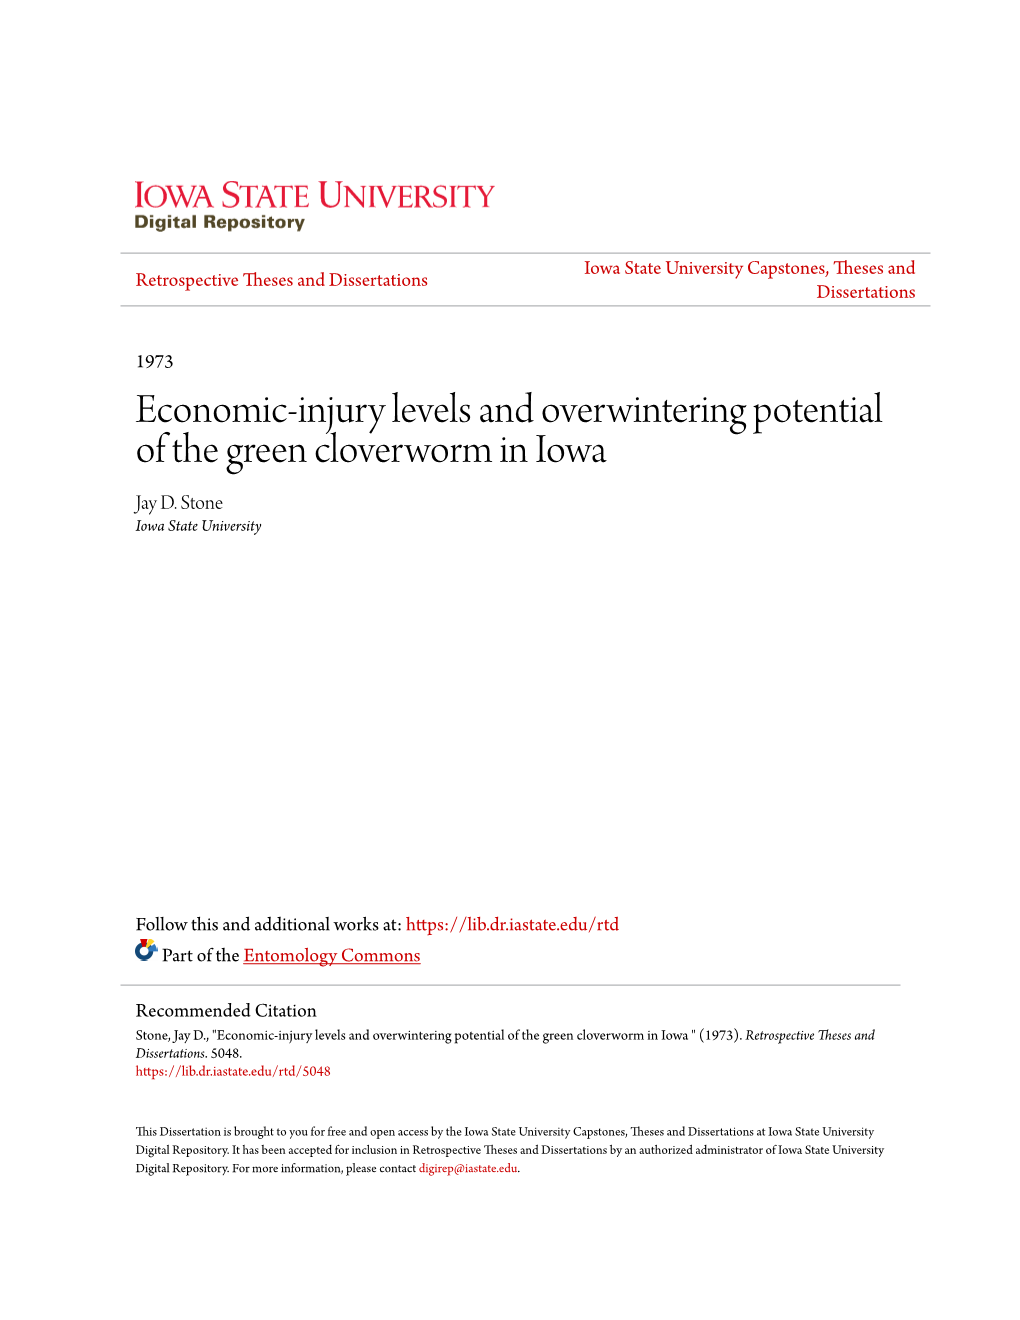 Economic-Injury Levels and Overwintering Potential of the Green Cloverworm in Iowa Jay D